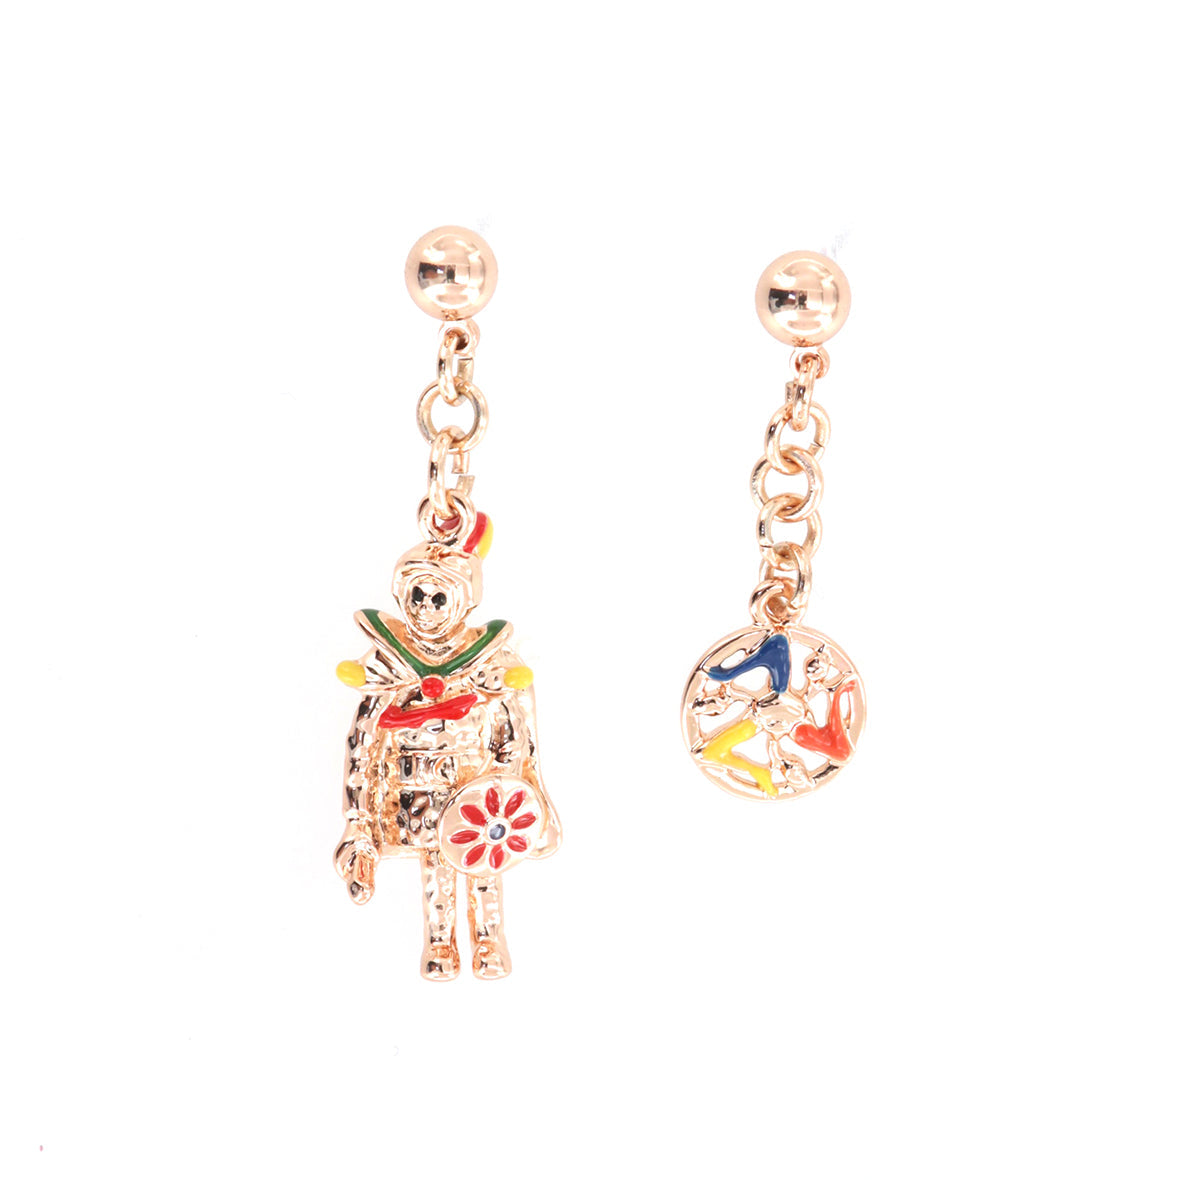 Metal earrings with Sicilian Pupo pendant embellished with enamels and crystals